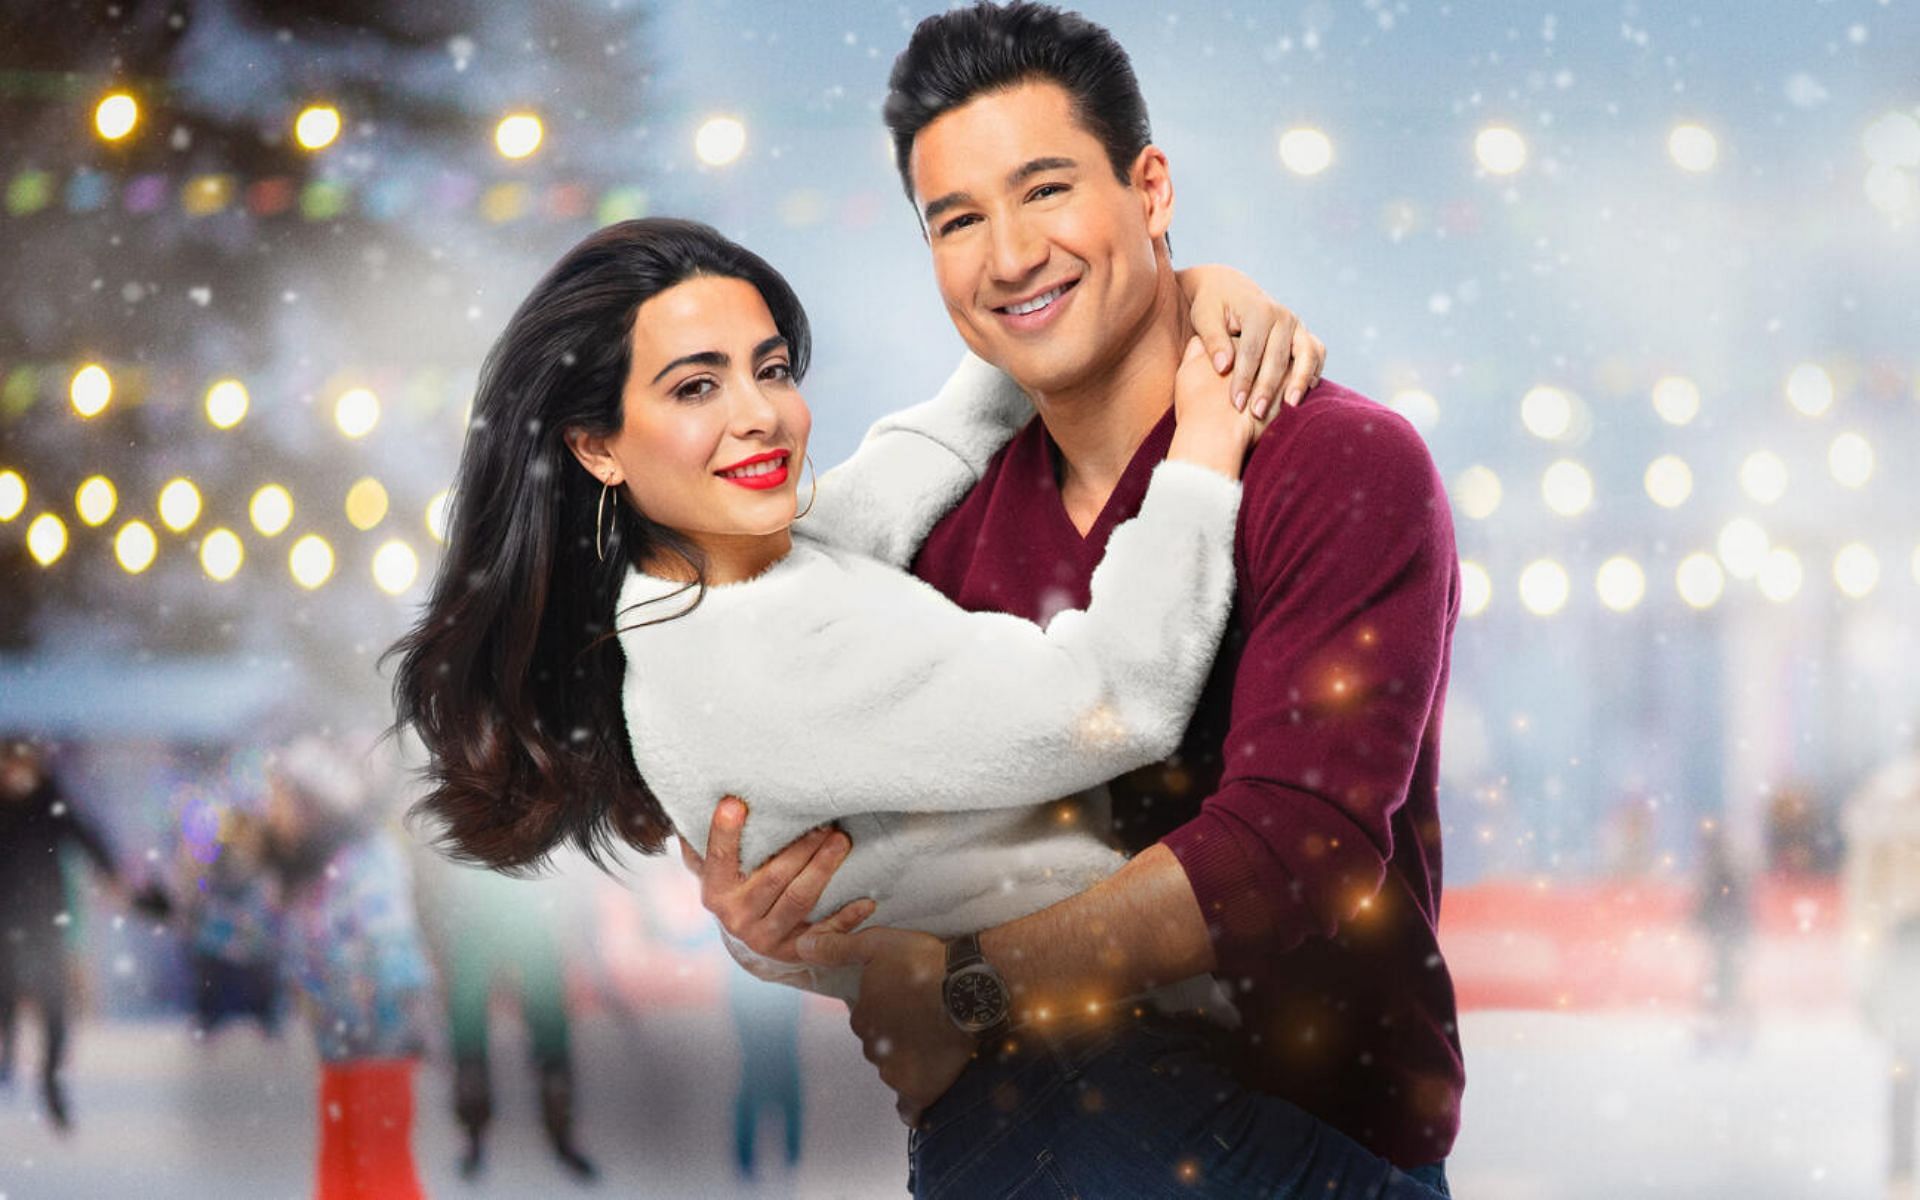 ‘Holiday in Santa Fe’ cast list Mario Lopez and others in Lifetime’s